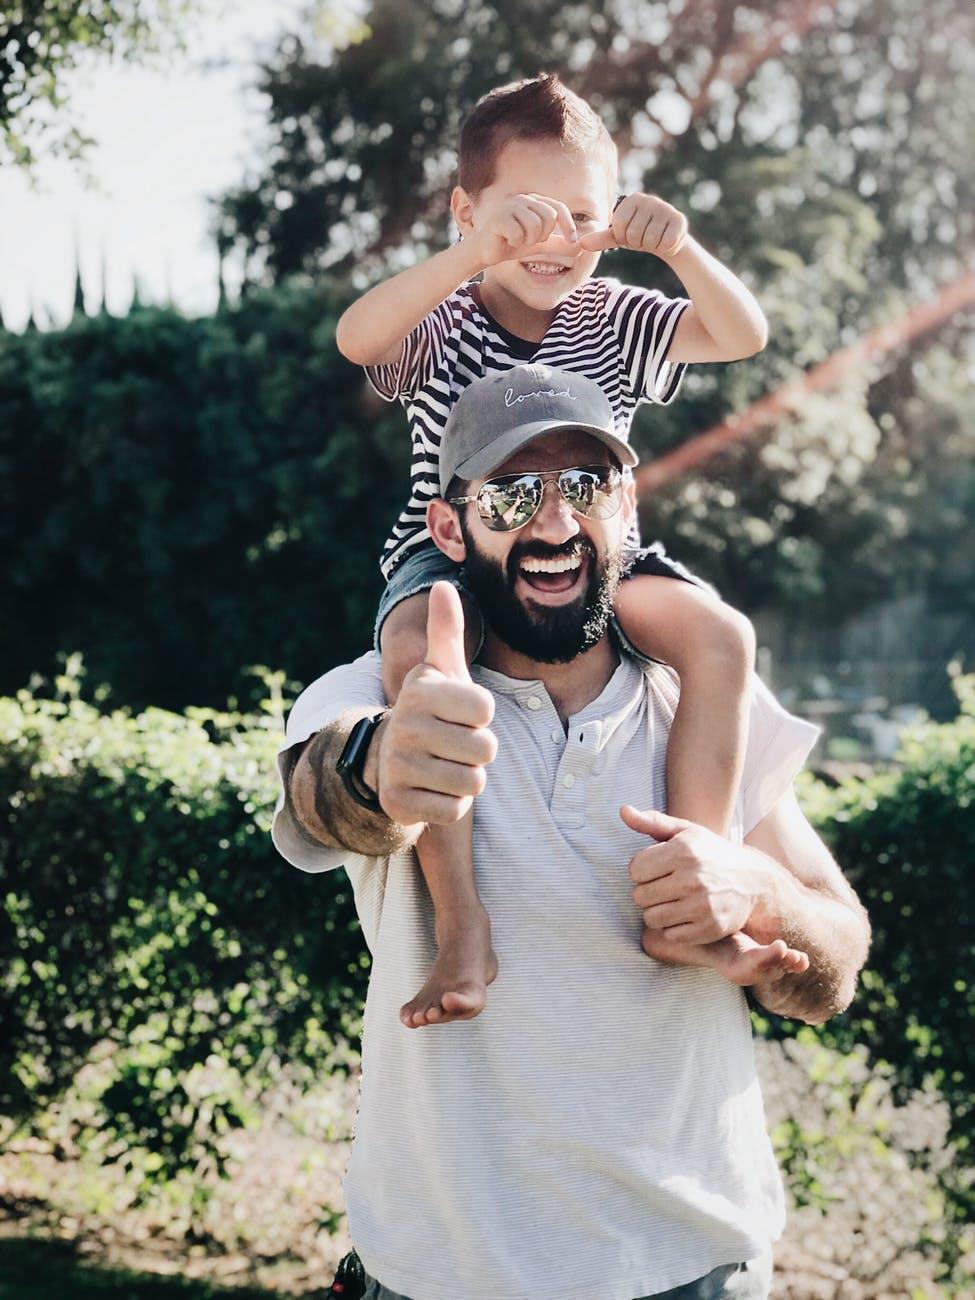 Dad with son on shoulders